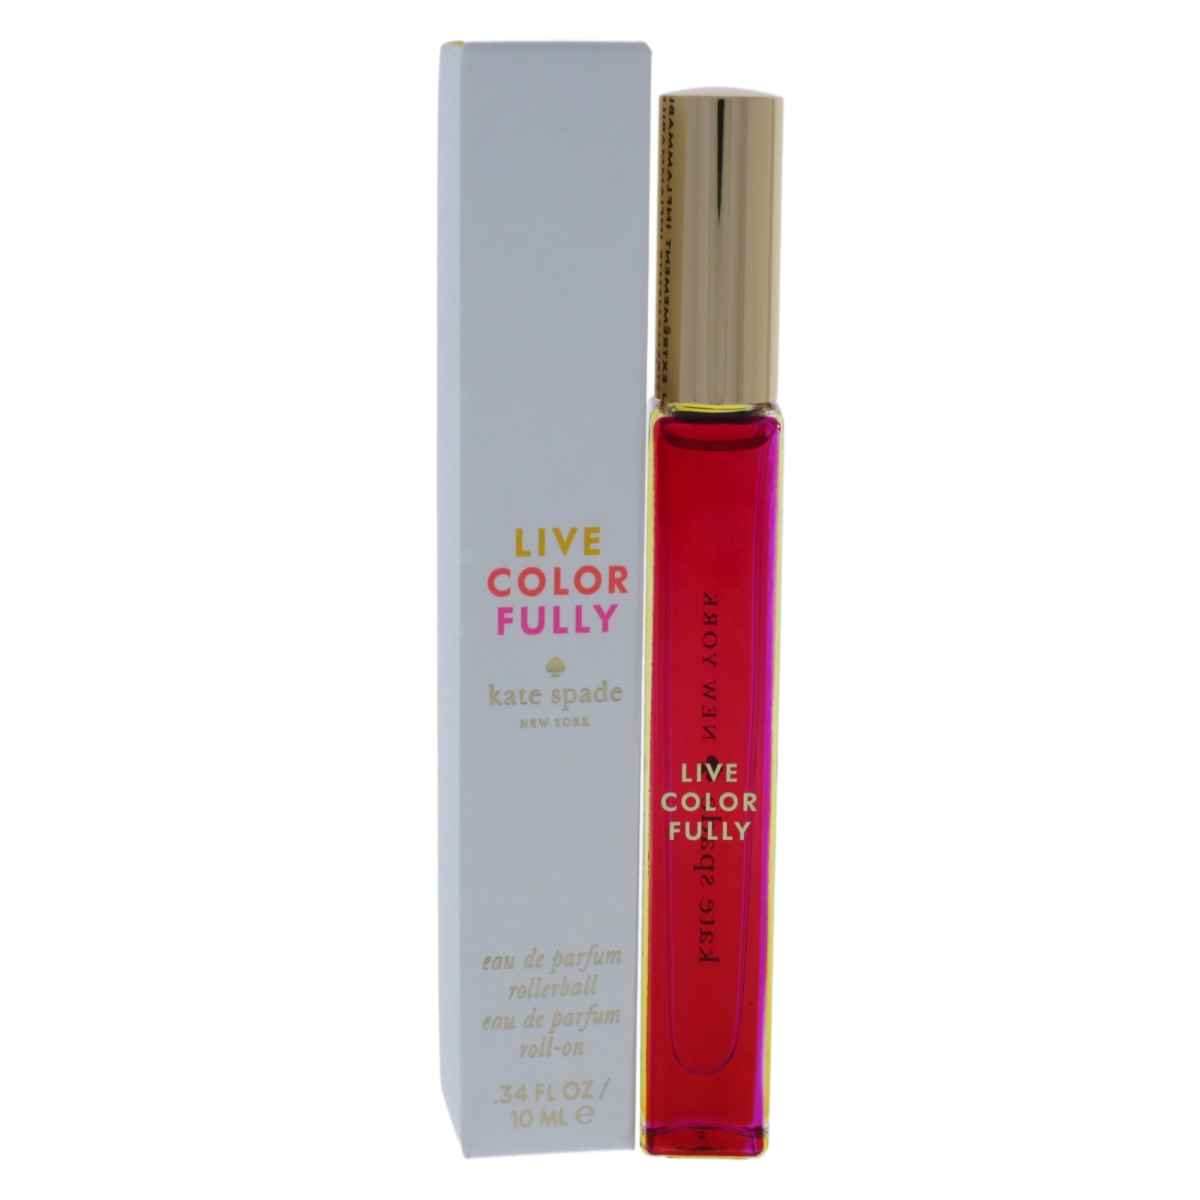 W-m-1650 0.34 Oz Live Colorfully Edp Rollerball For Women - Mini